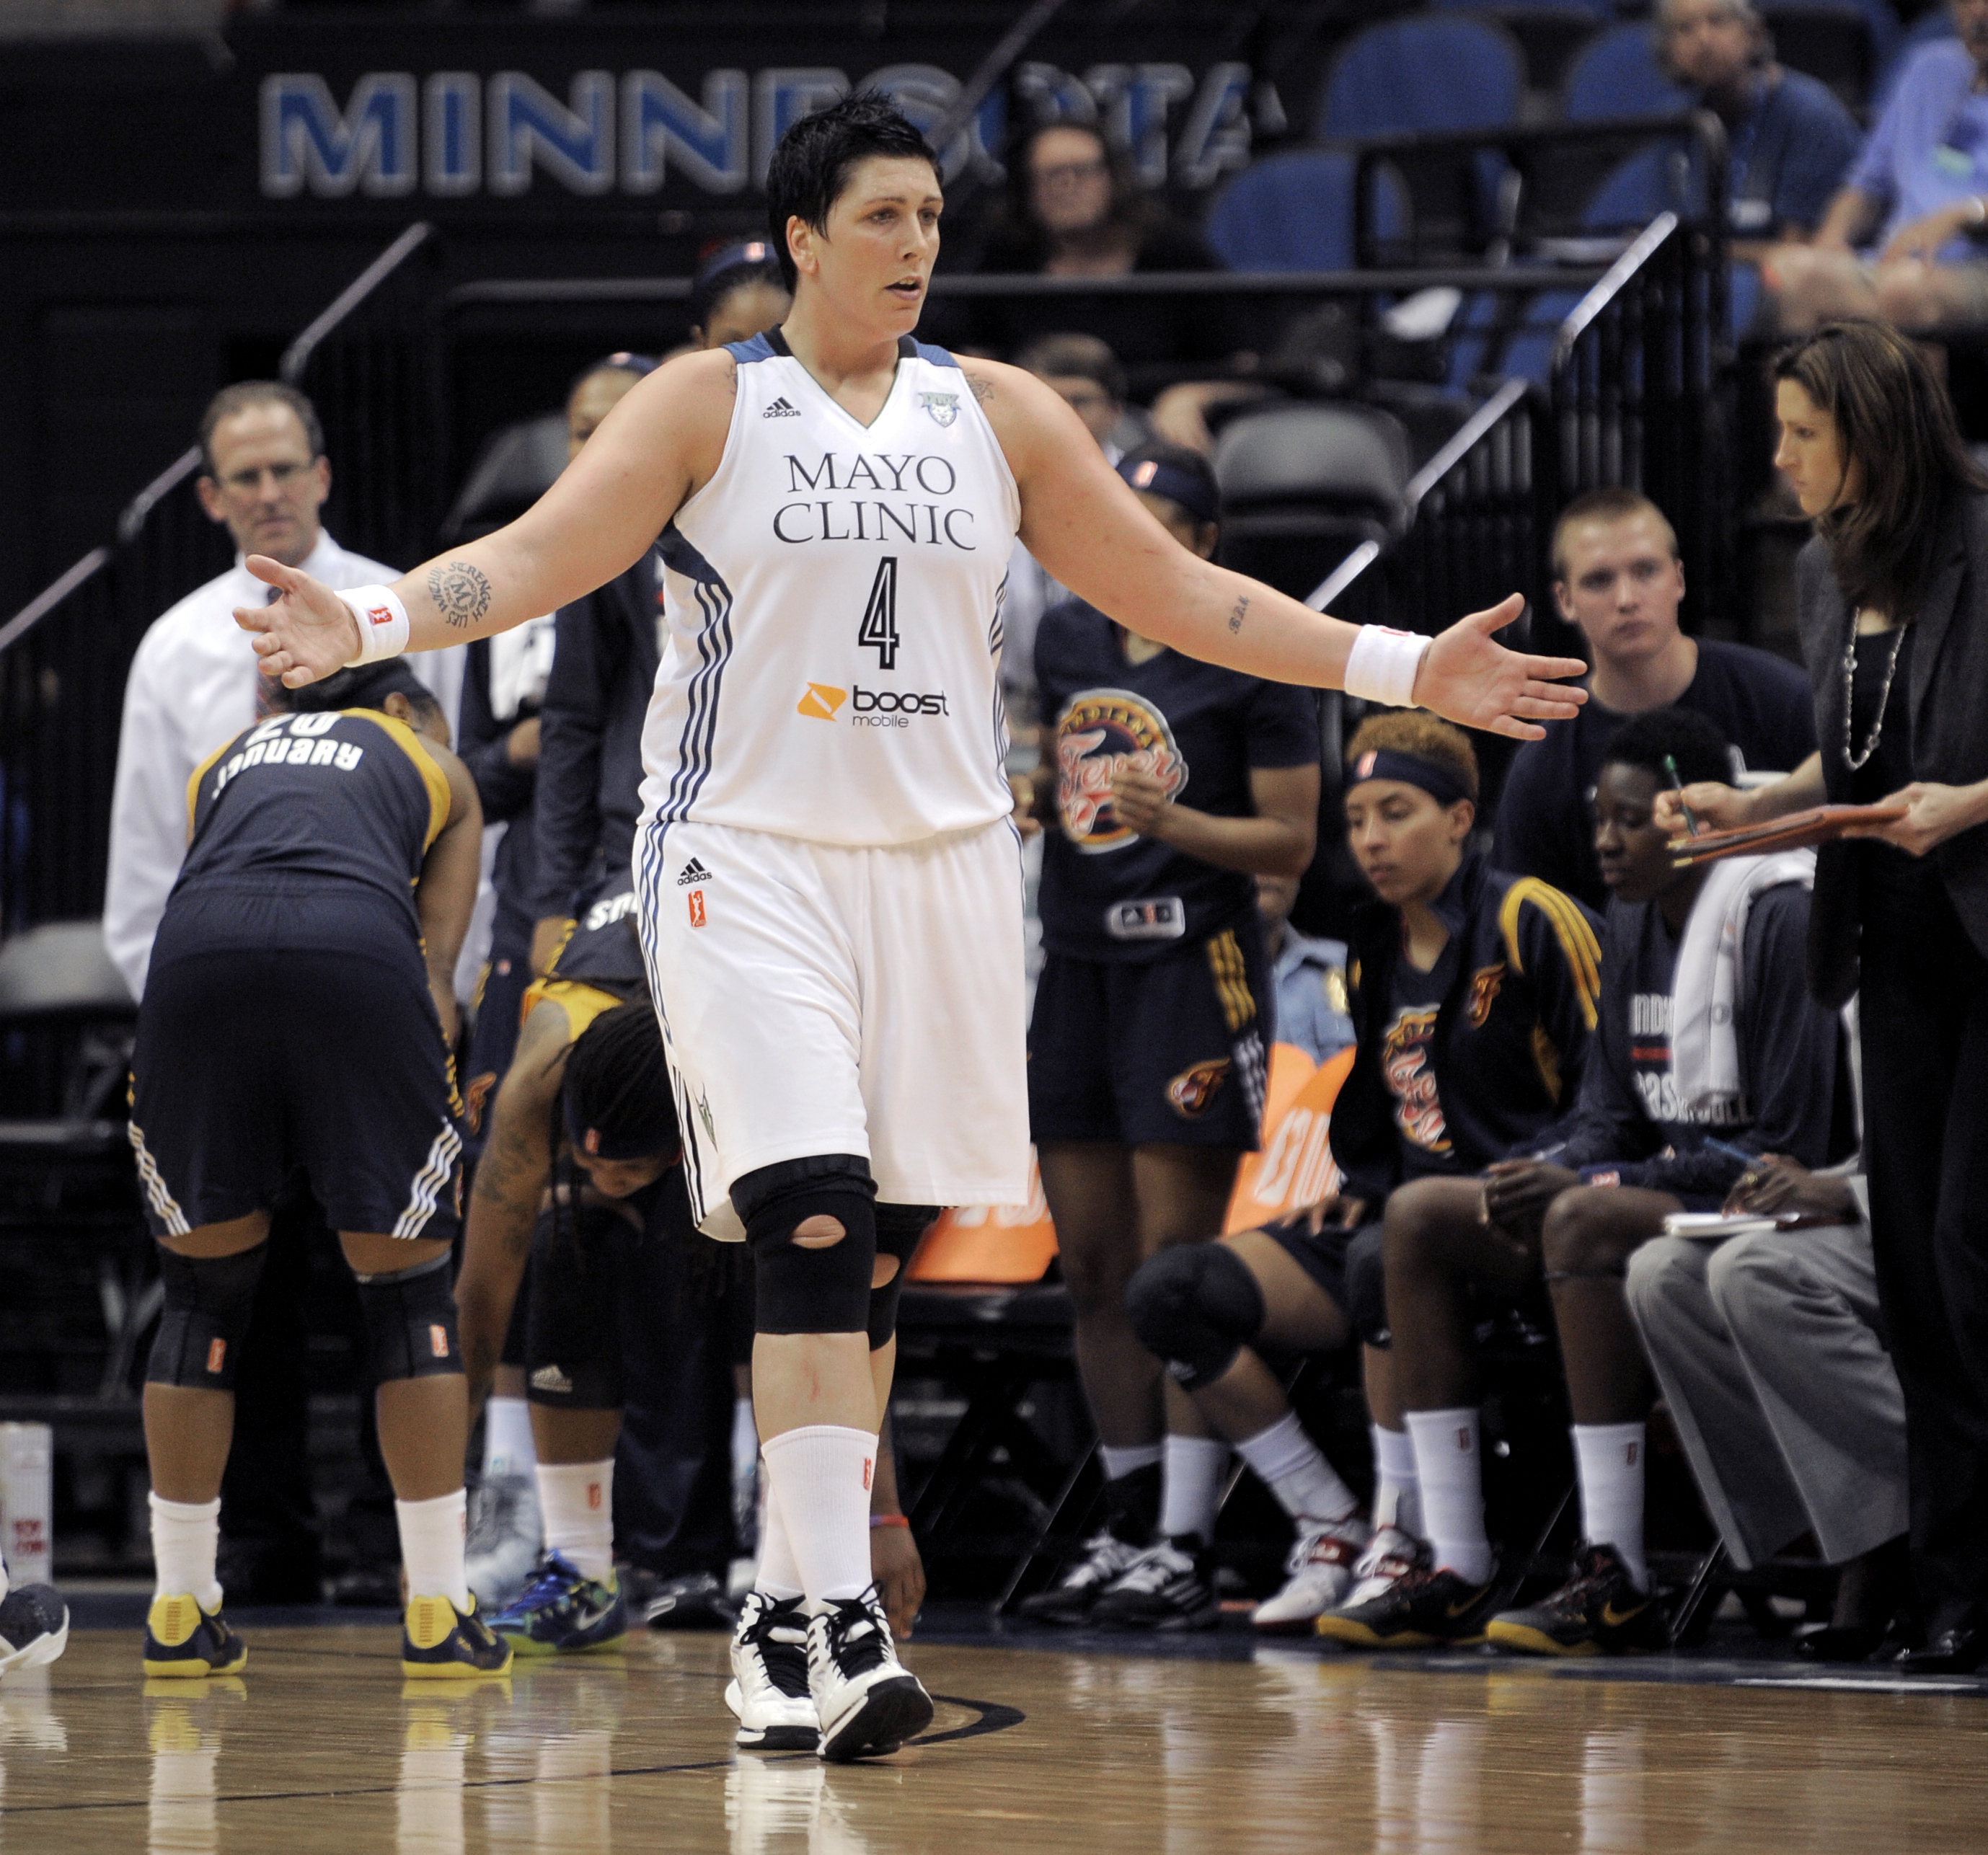 Minnesota Lynx center Janel McCarville during a WNBA basketball game against the Indiana Fever Sunday, June 22, 2014, in Minneapolis. (AP Photo/Tom Olmscheid)